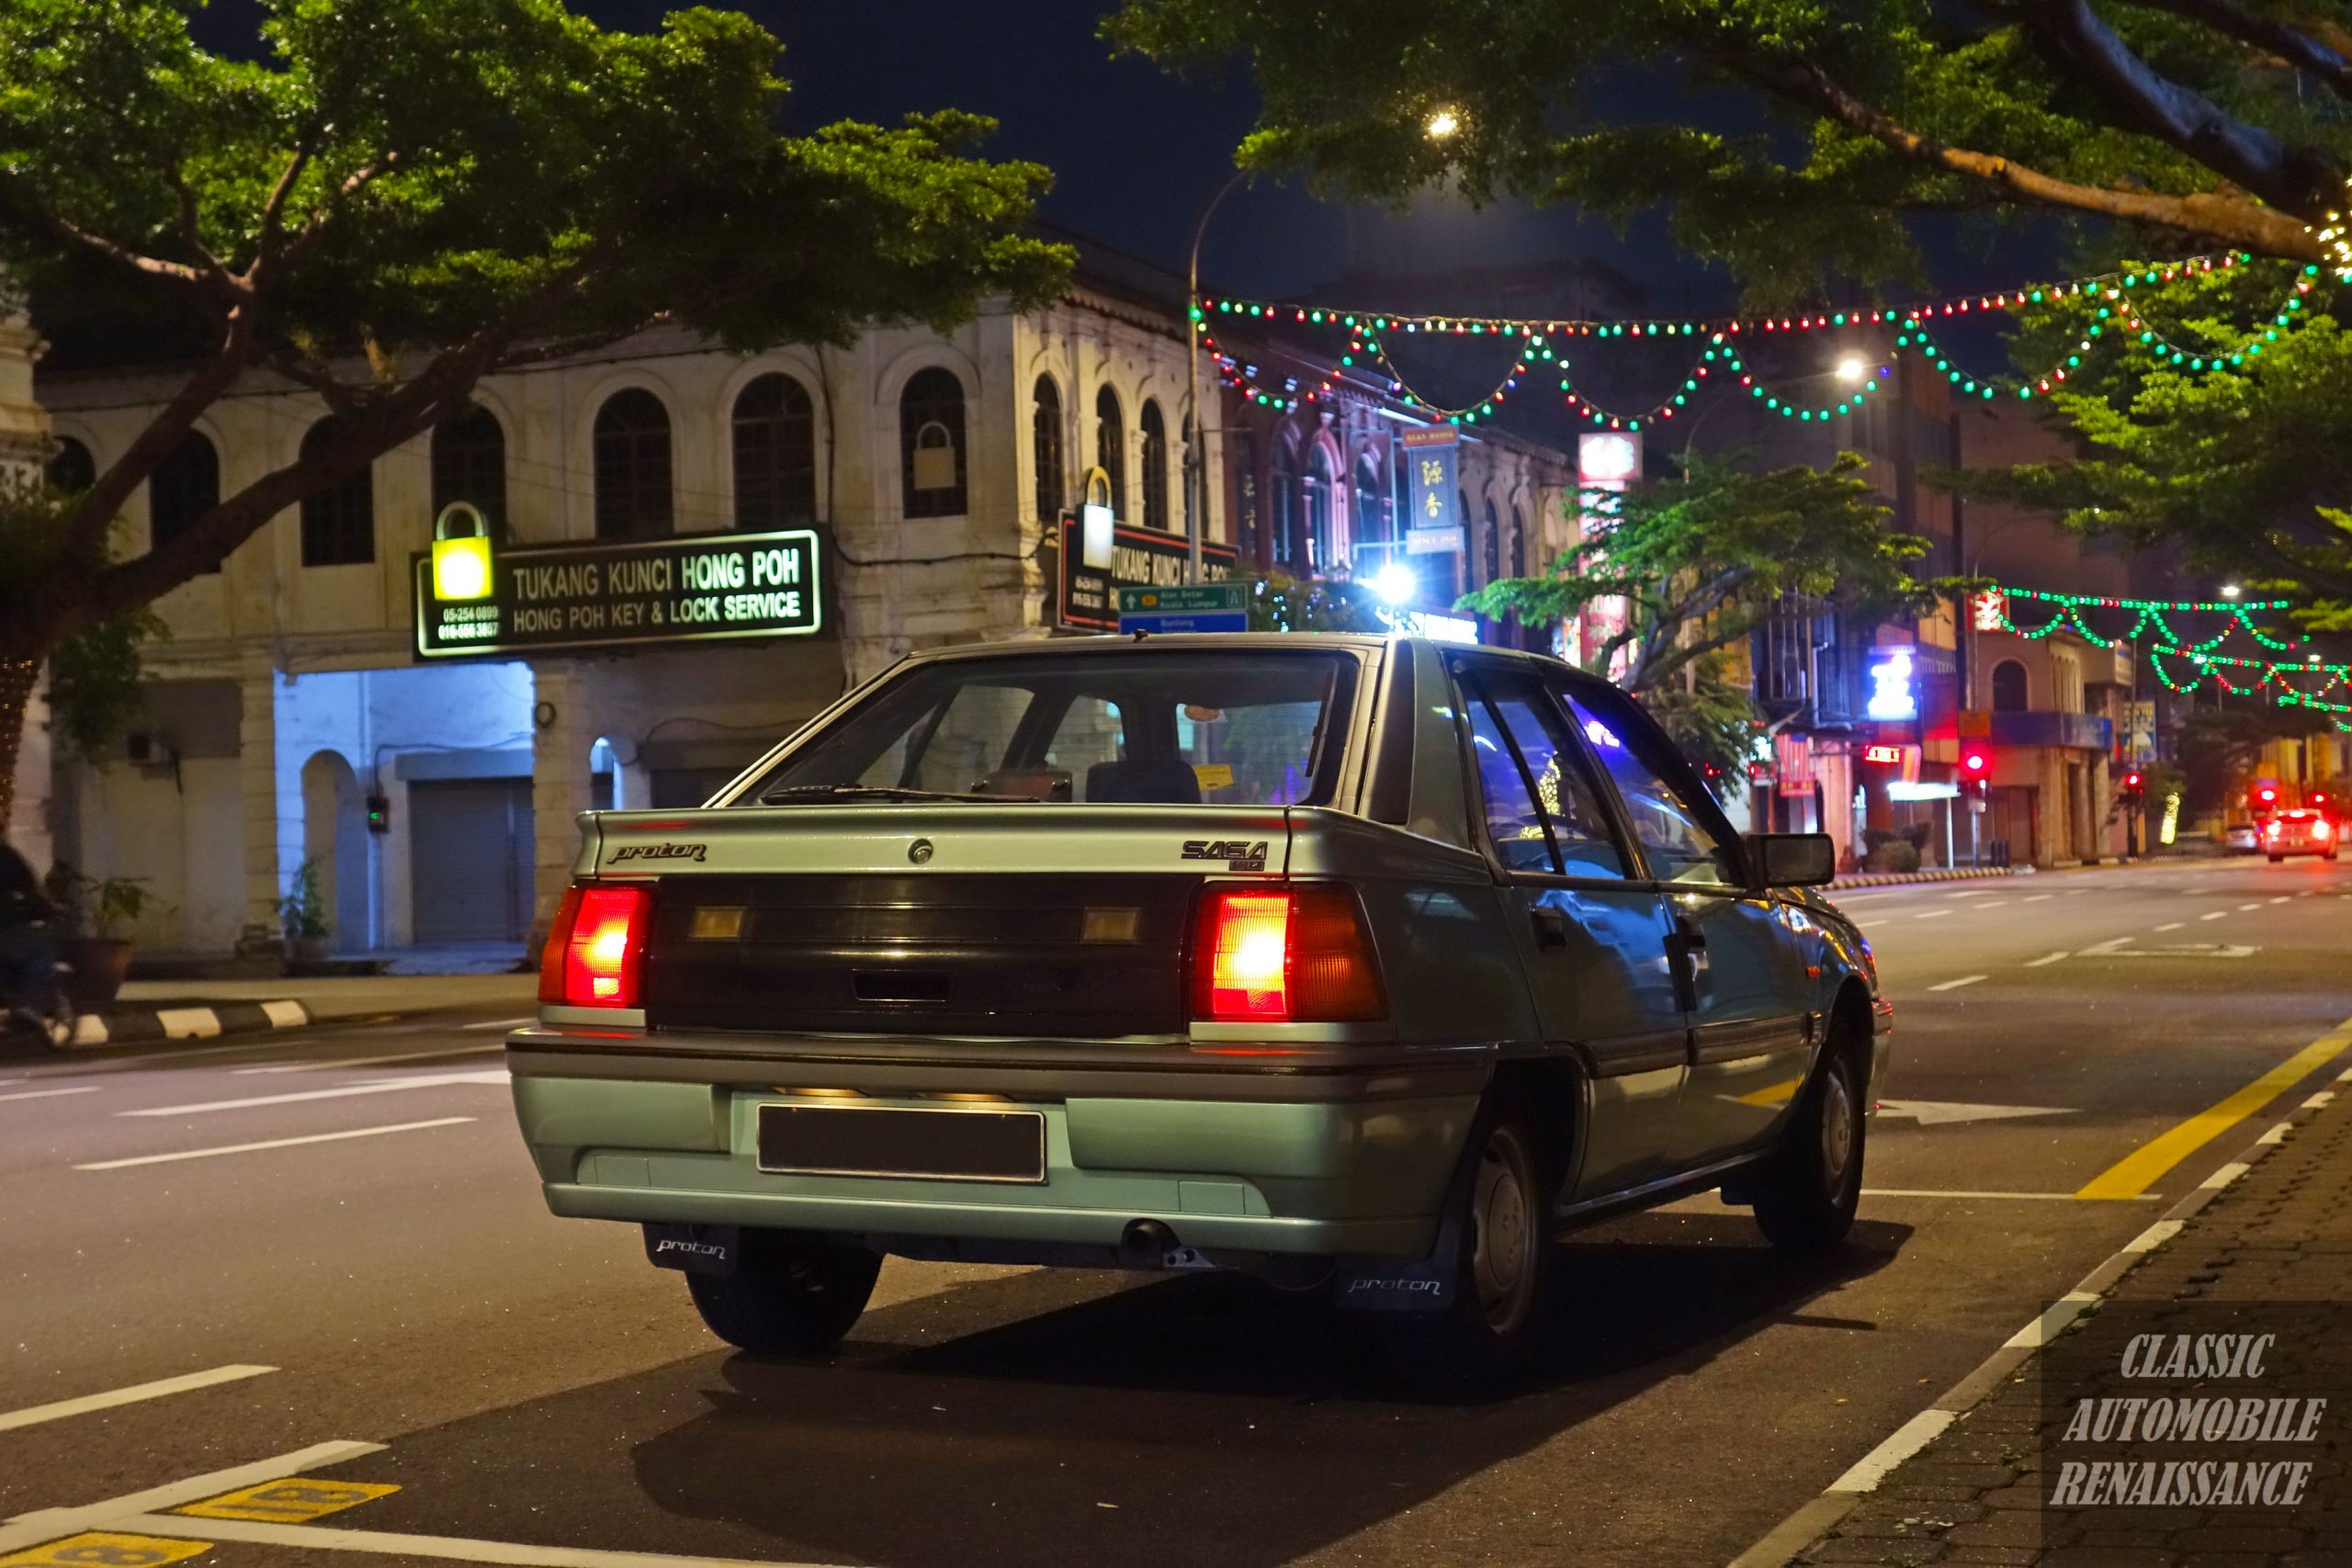 After 5 years of ownership, Ken's Proton Saga continues to serve him faithfully. Image credit: Classic Automobile Renaissance